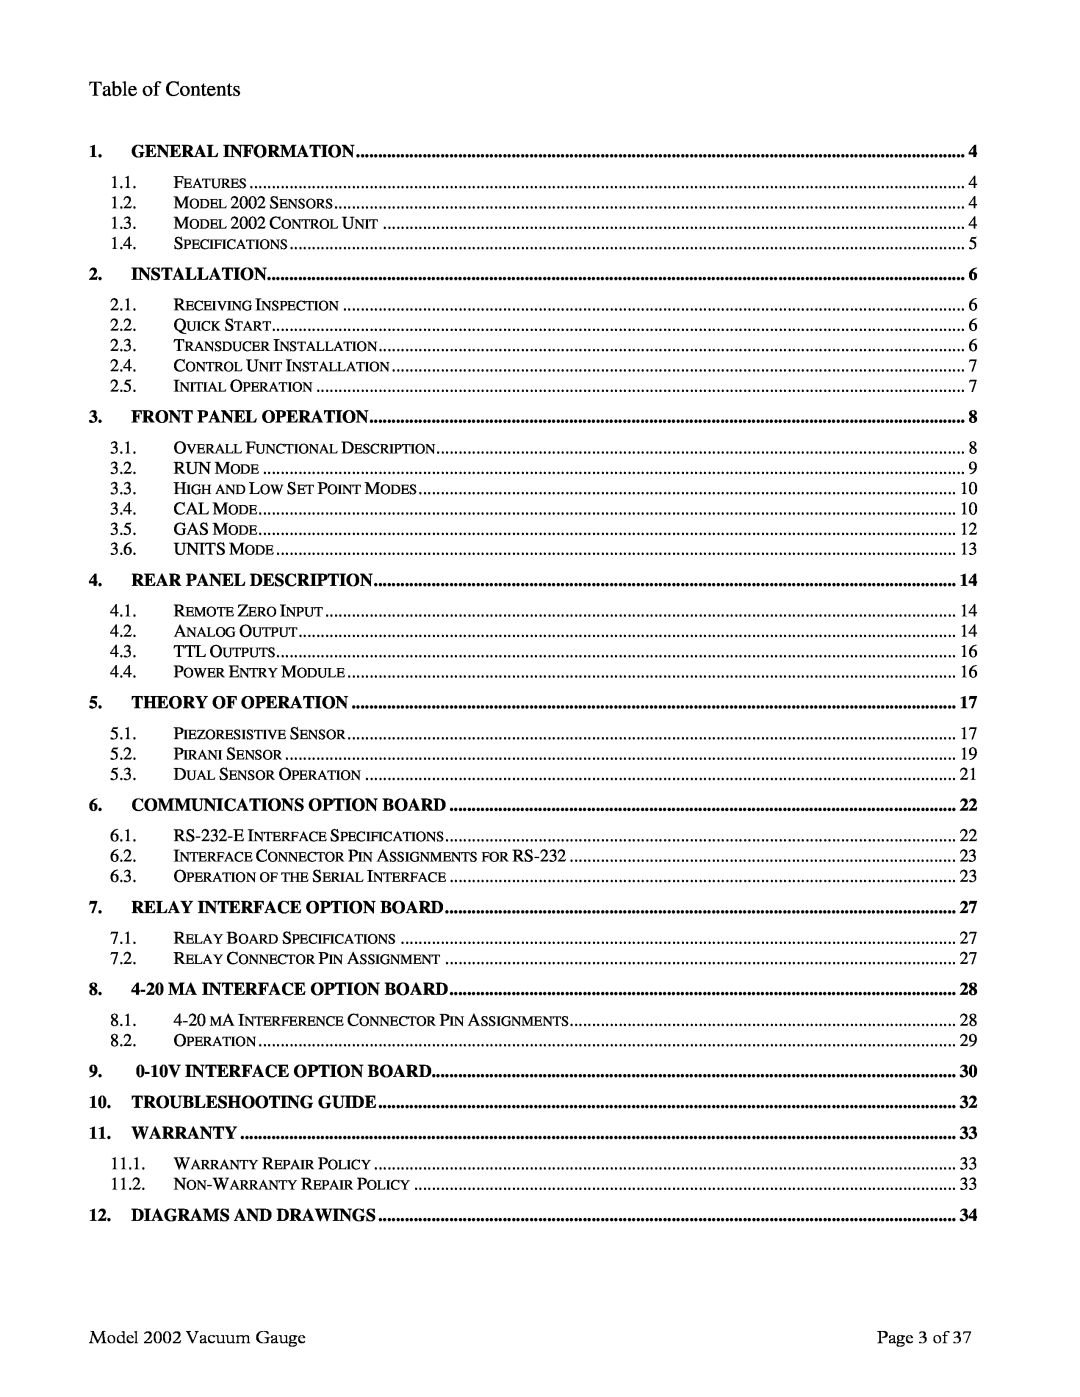 Teledyne 2002 instruction manual Table of Contents 